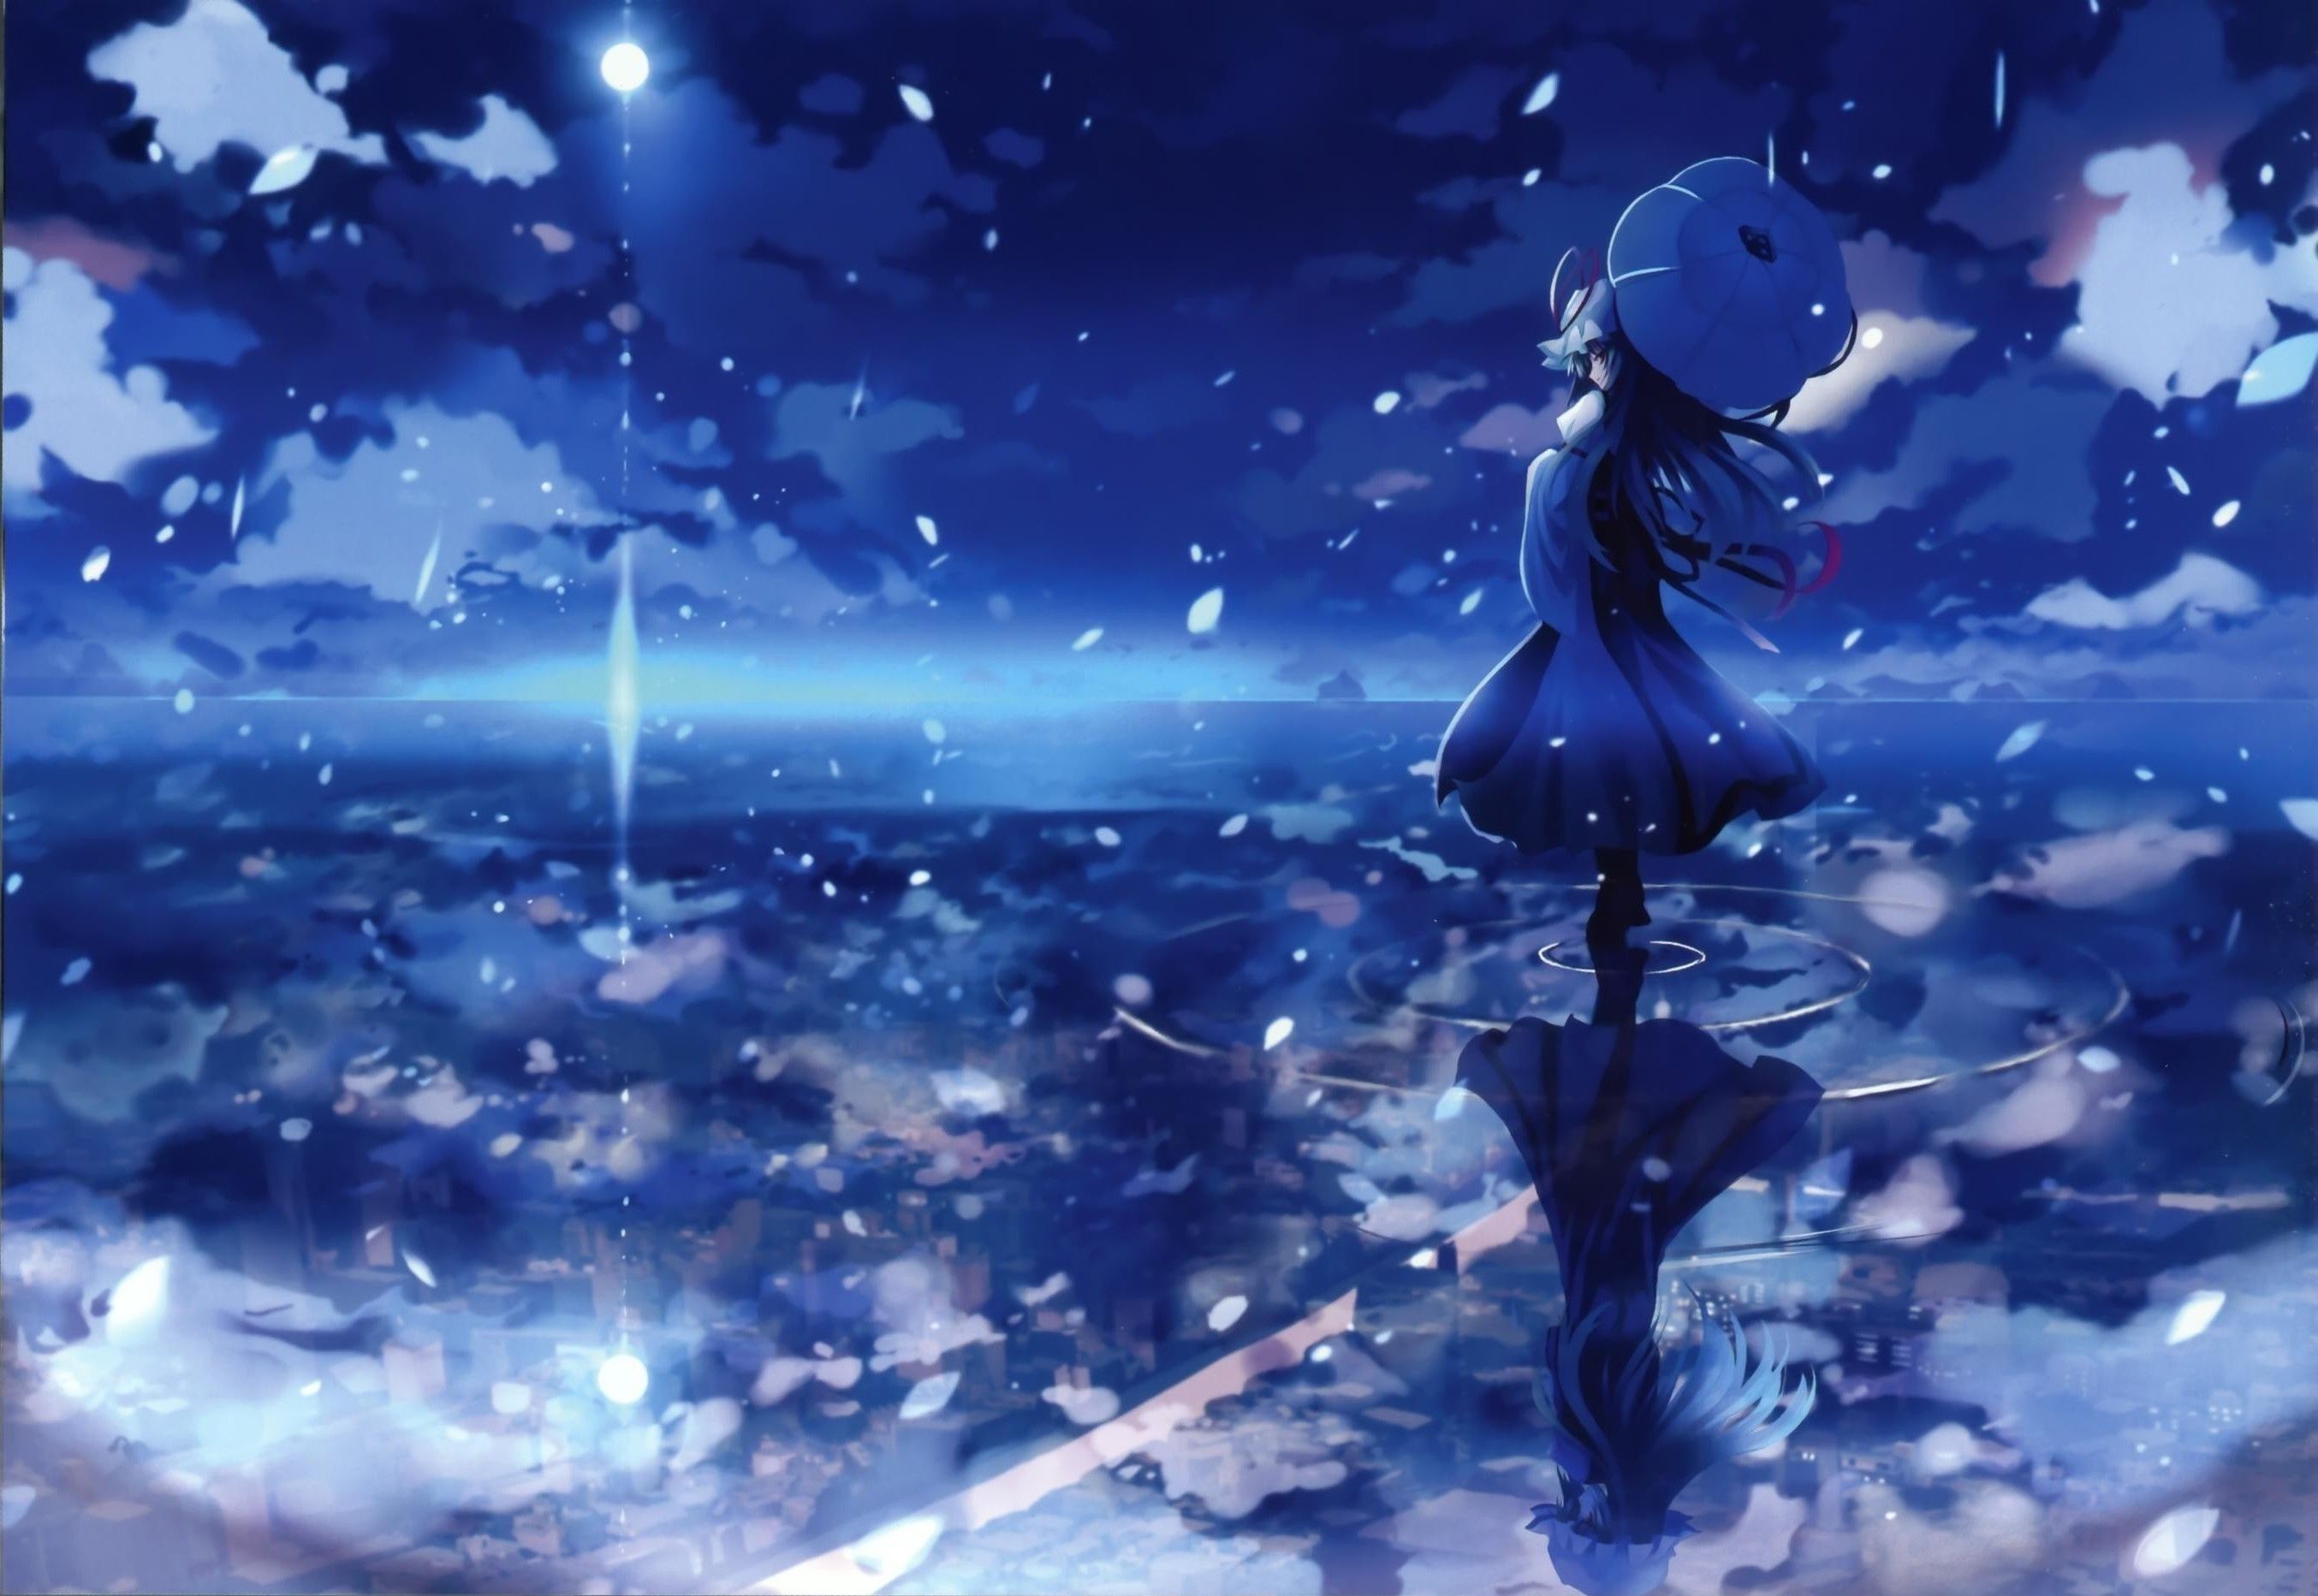 A blue anime girl stands in a large body of water at night, looking up at the stars. The sky is filled with stars and the girl is reflected in the water beneath her. The image has a dreamy and peaceful aesthetic. - Blue anime